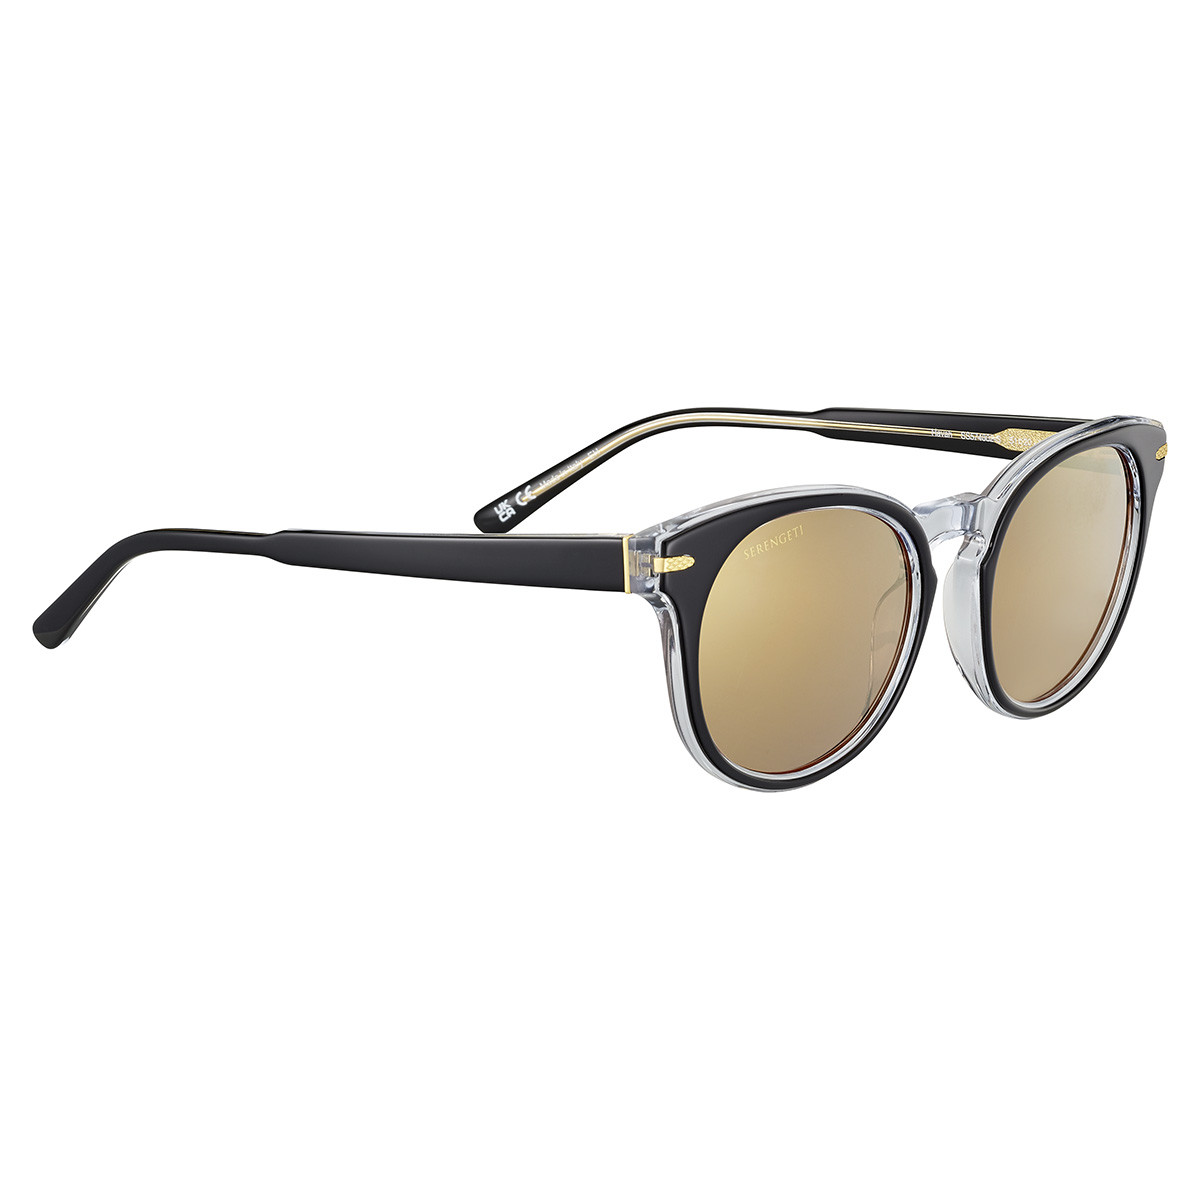 Havah_Shiny Black Transparent Layer-Mineral Polarized Drivers Gold Cat 3 to 3-010